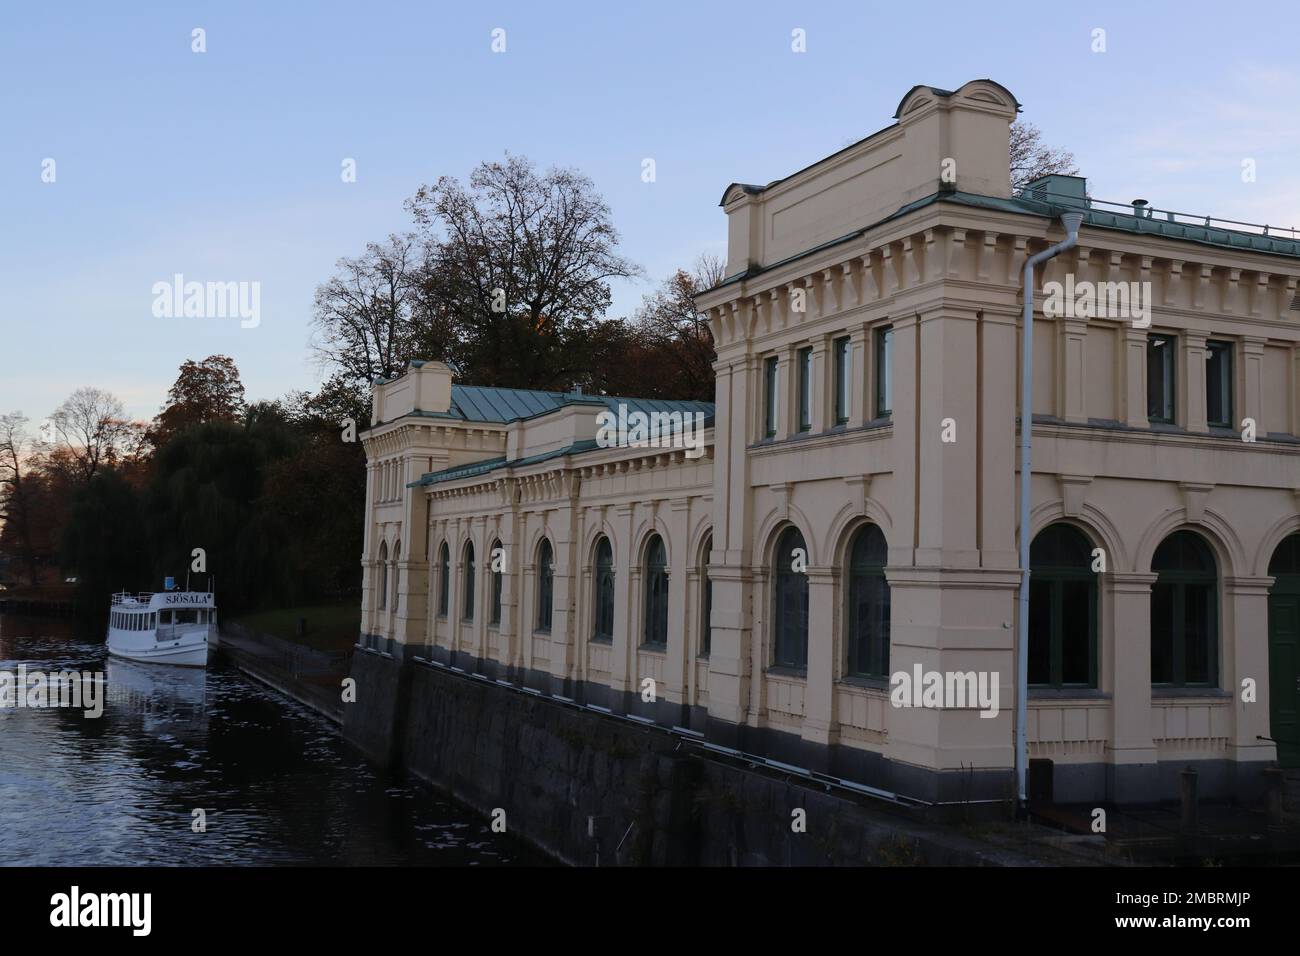 The old hydroelectric power plant in Uppsala, Sweden Stock Photo